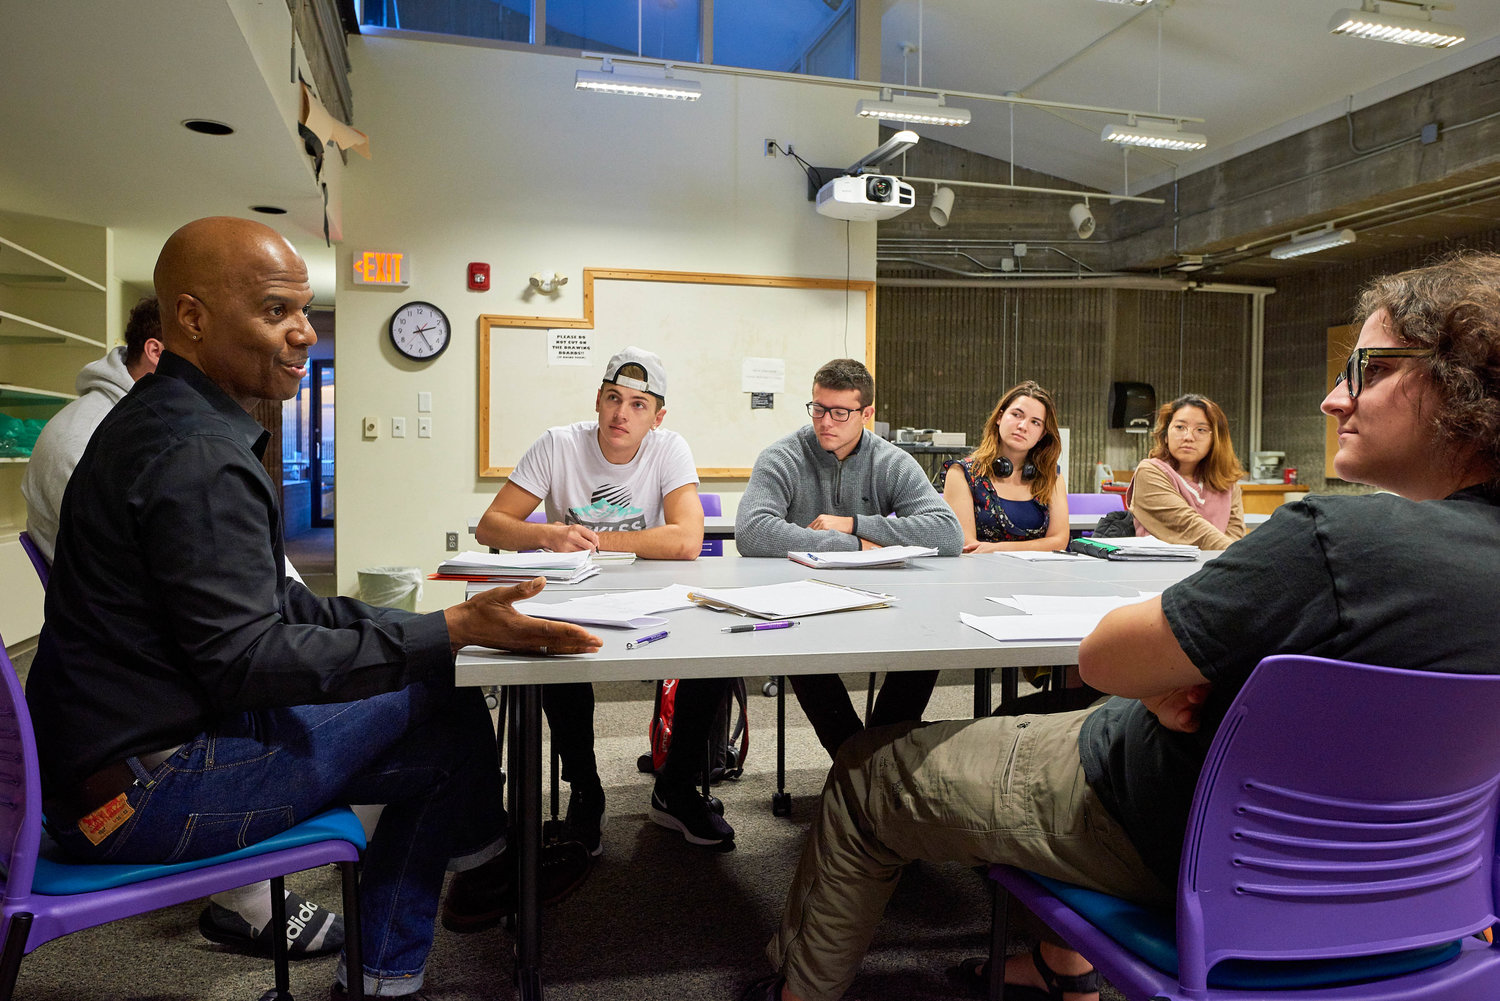 Kyle Bass, Assistant Professor of Theater, teaches a class in drama and theater arts in Dana Hall at Colgate University in 2019.